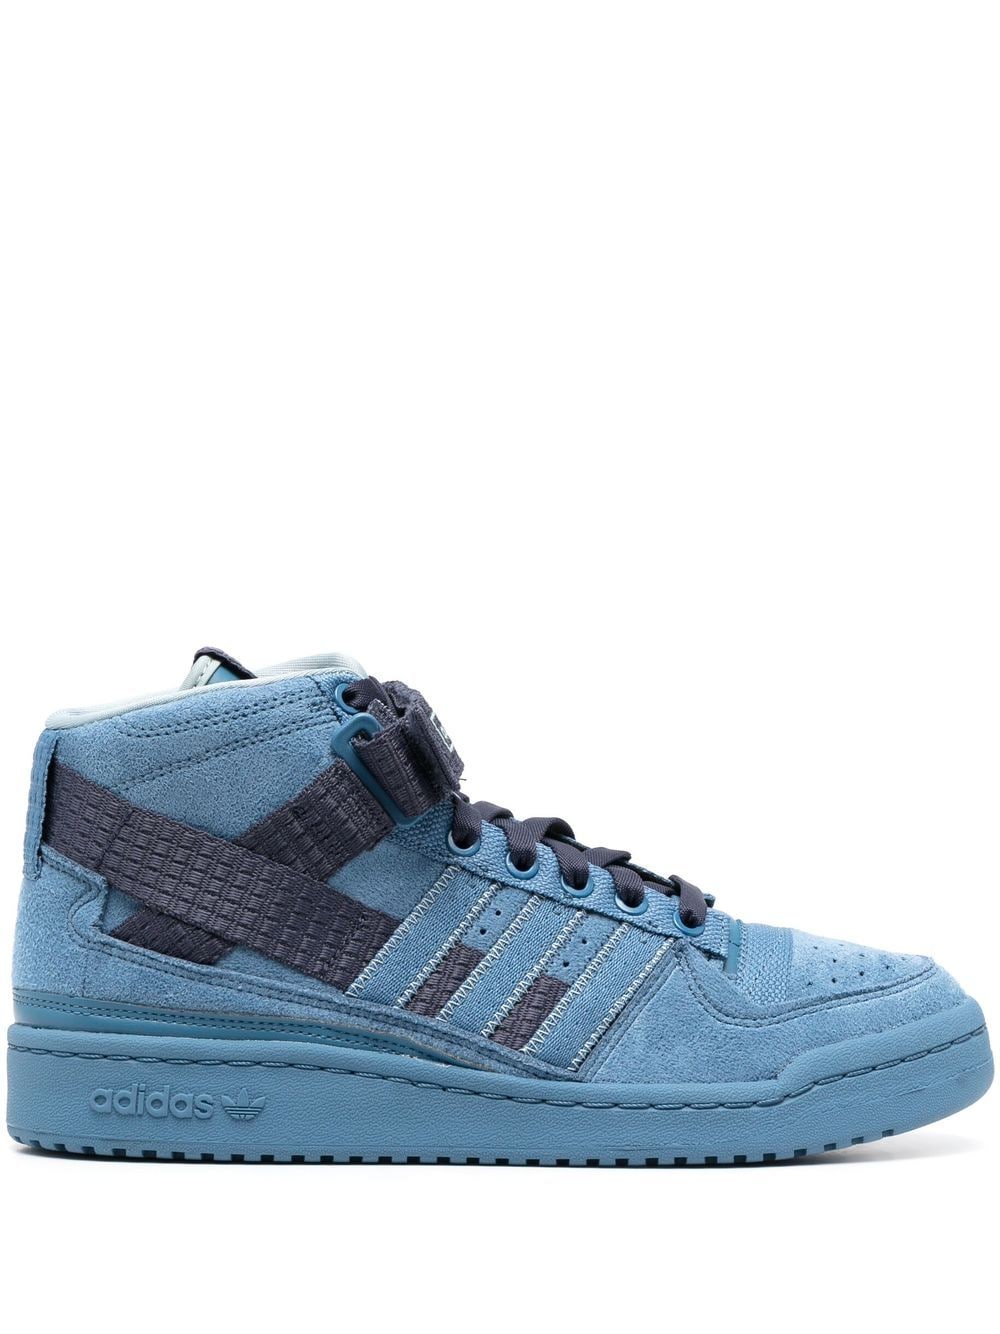 Adidas Originals Forum Mid Parley High-top Sneakers In 蓝色